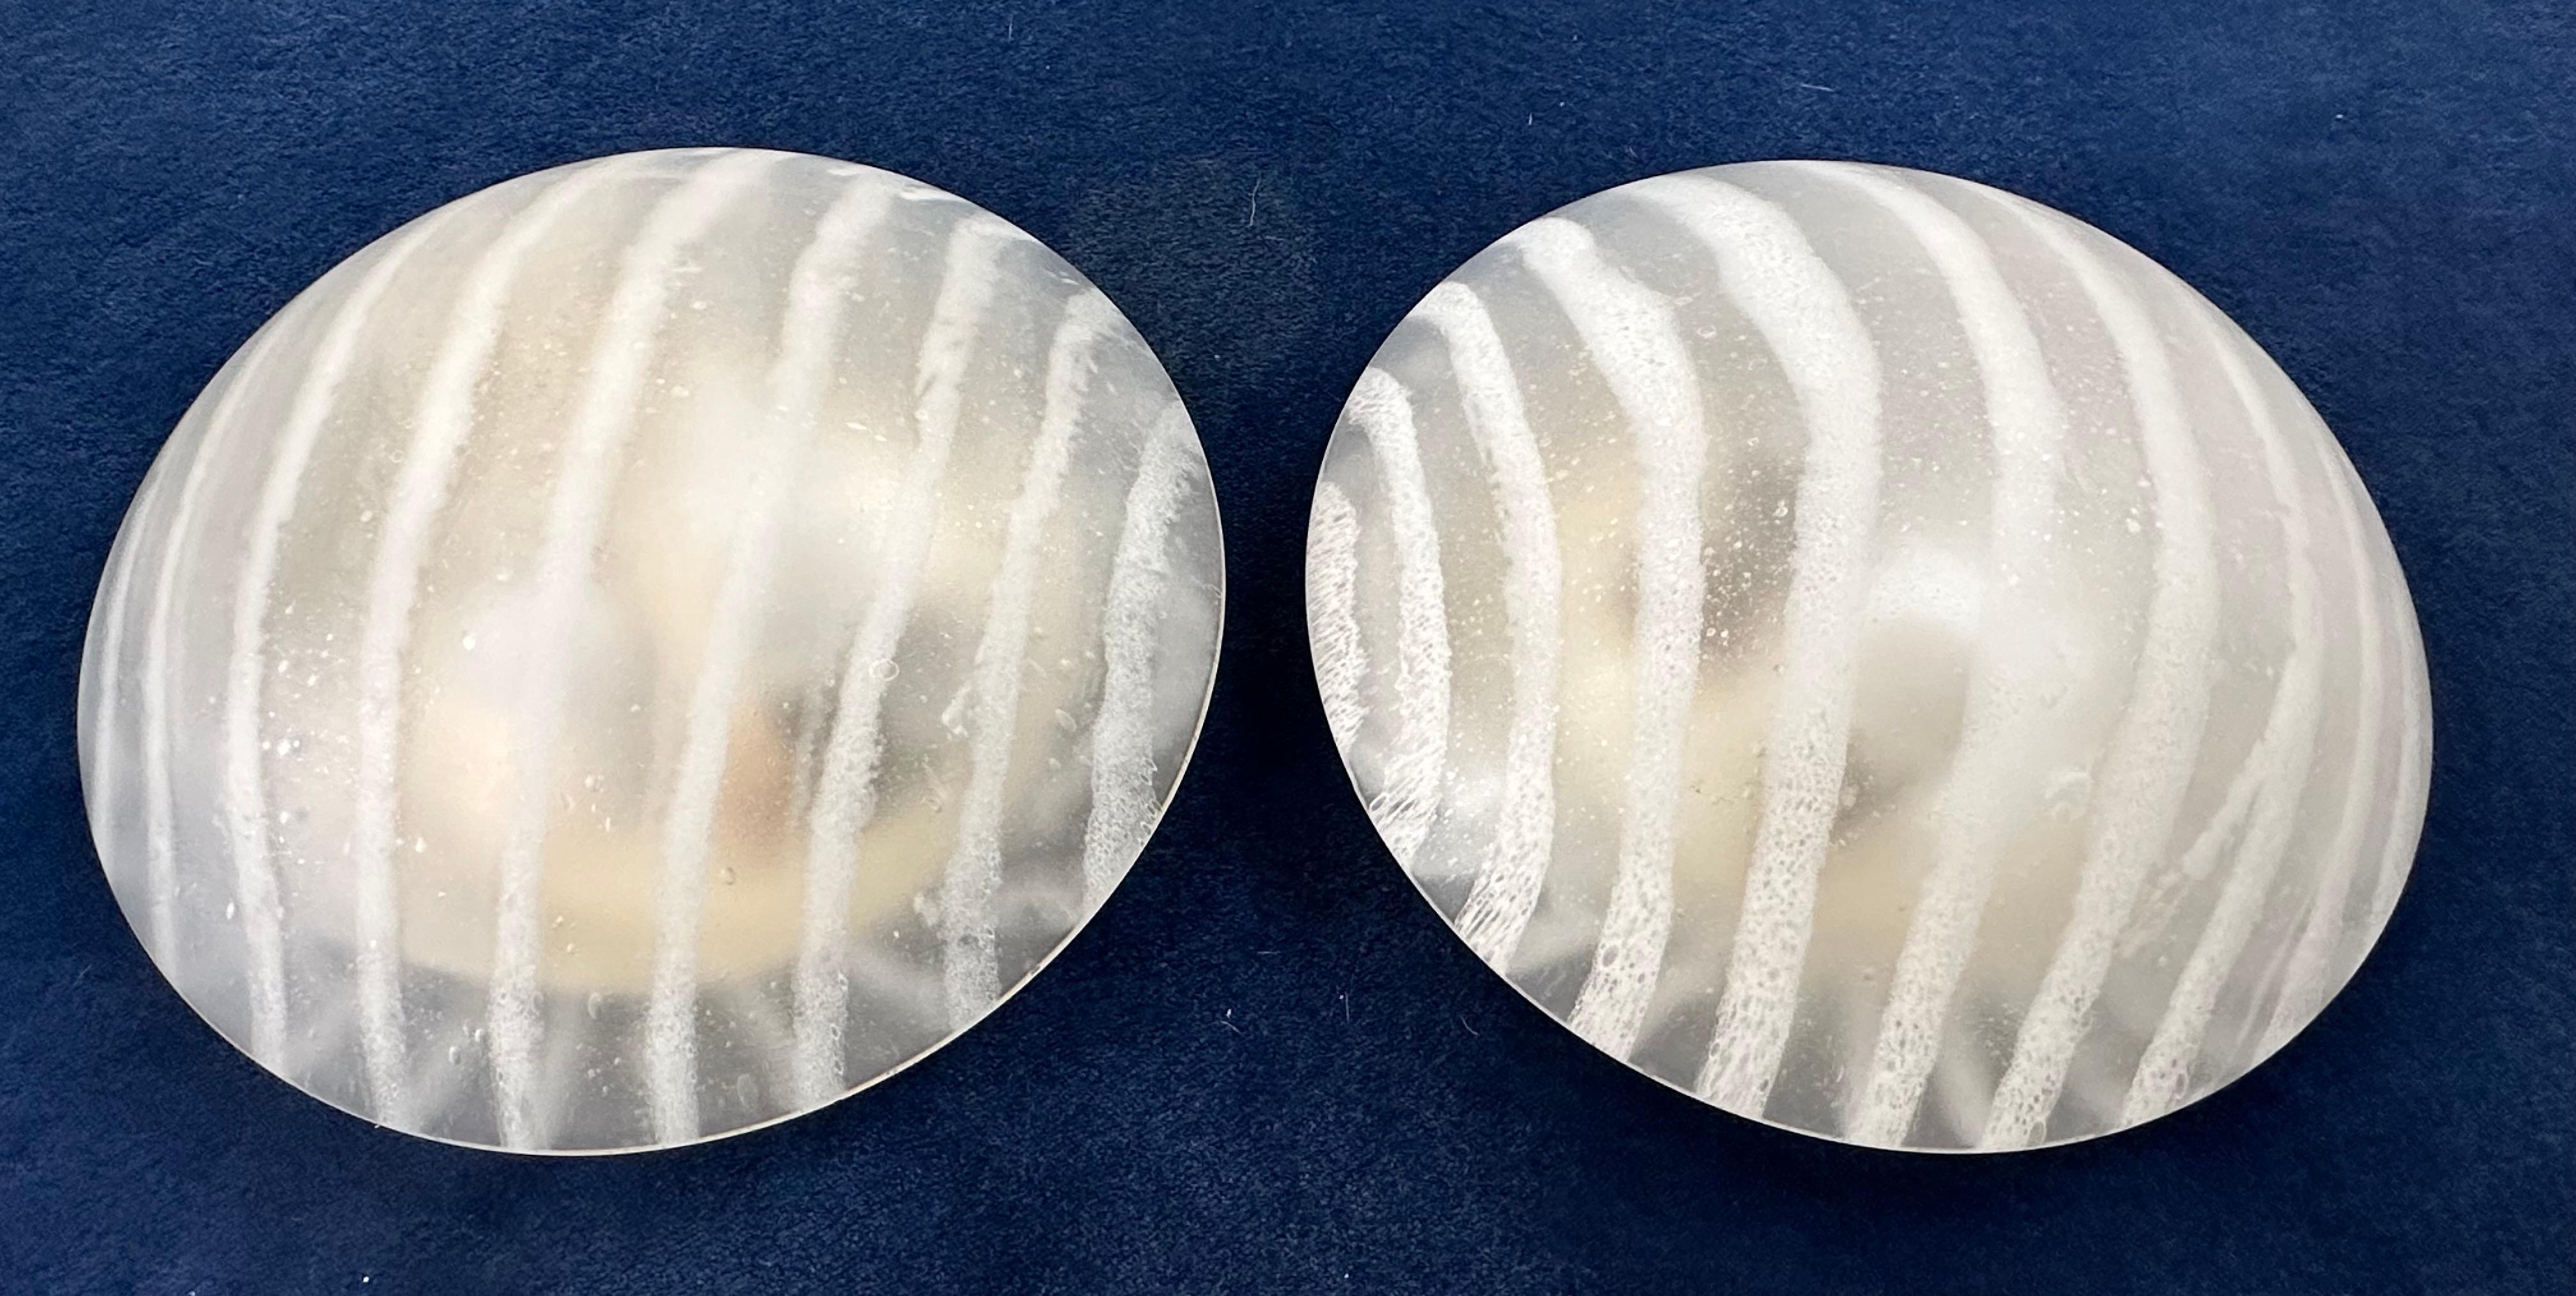 Pair of 1970s German Peill & Putzler Plafoniere space-age frosted glass with a swirled tripod pattern wall lights / sconces or flush mount ceiling lights. The frosted glass round shades screw onto the white lacquered metal bulb holder and are